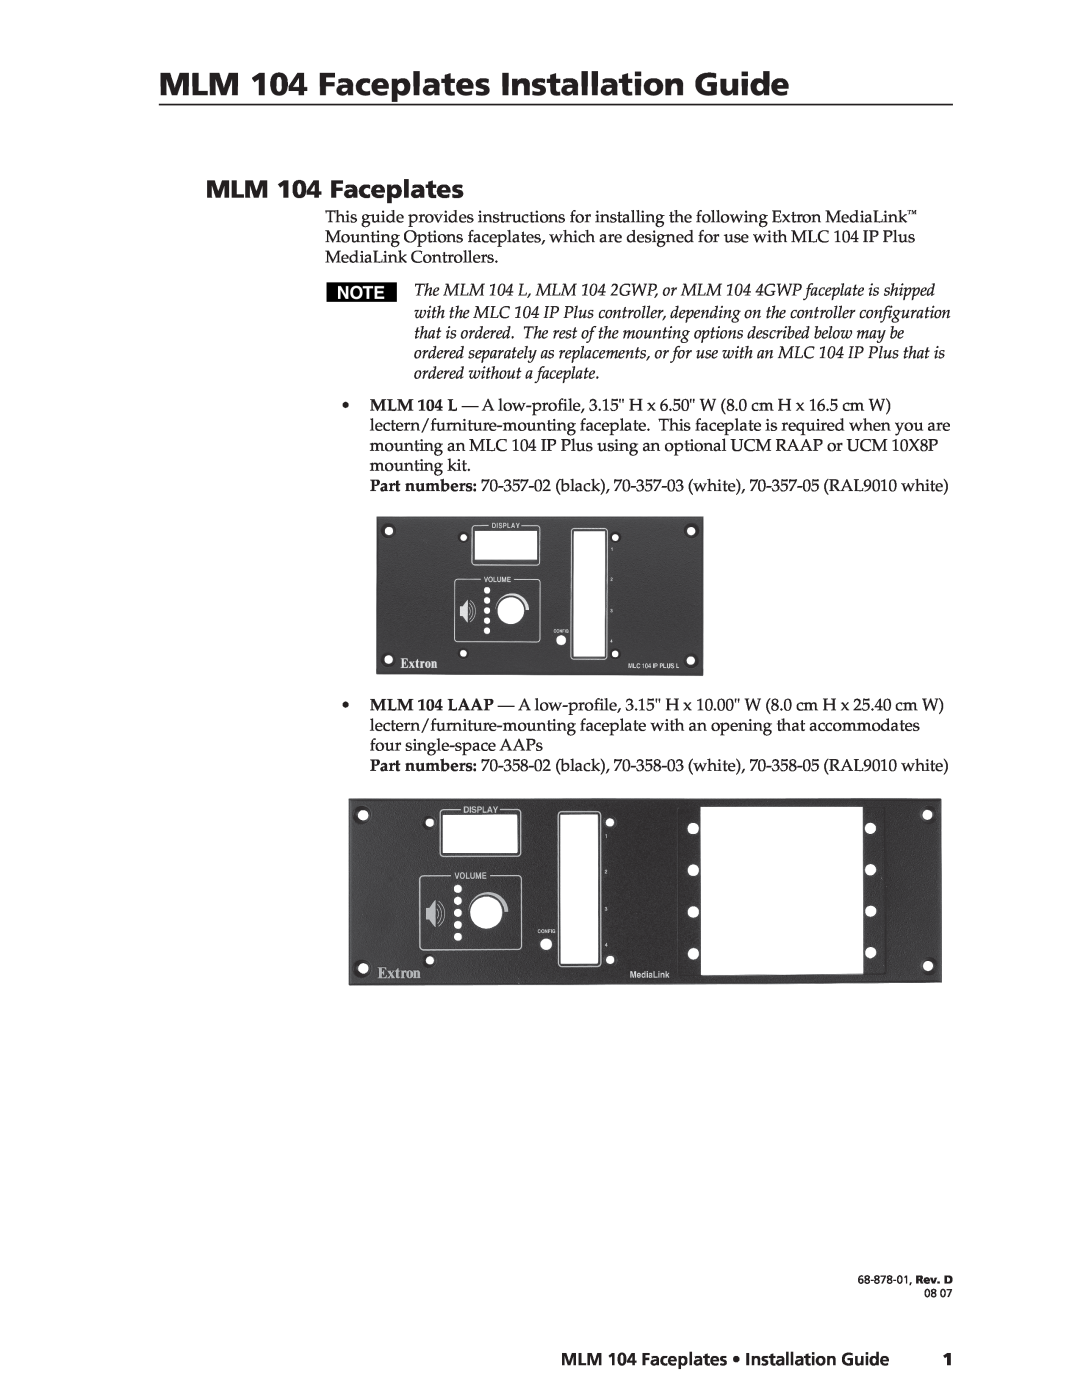 Extron electronic MLM 104 4GWP, MLM 104 2GWP, MLM 104 LAAP manual MLM 104 Faceplates Installation Guide 